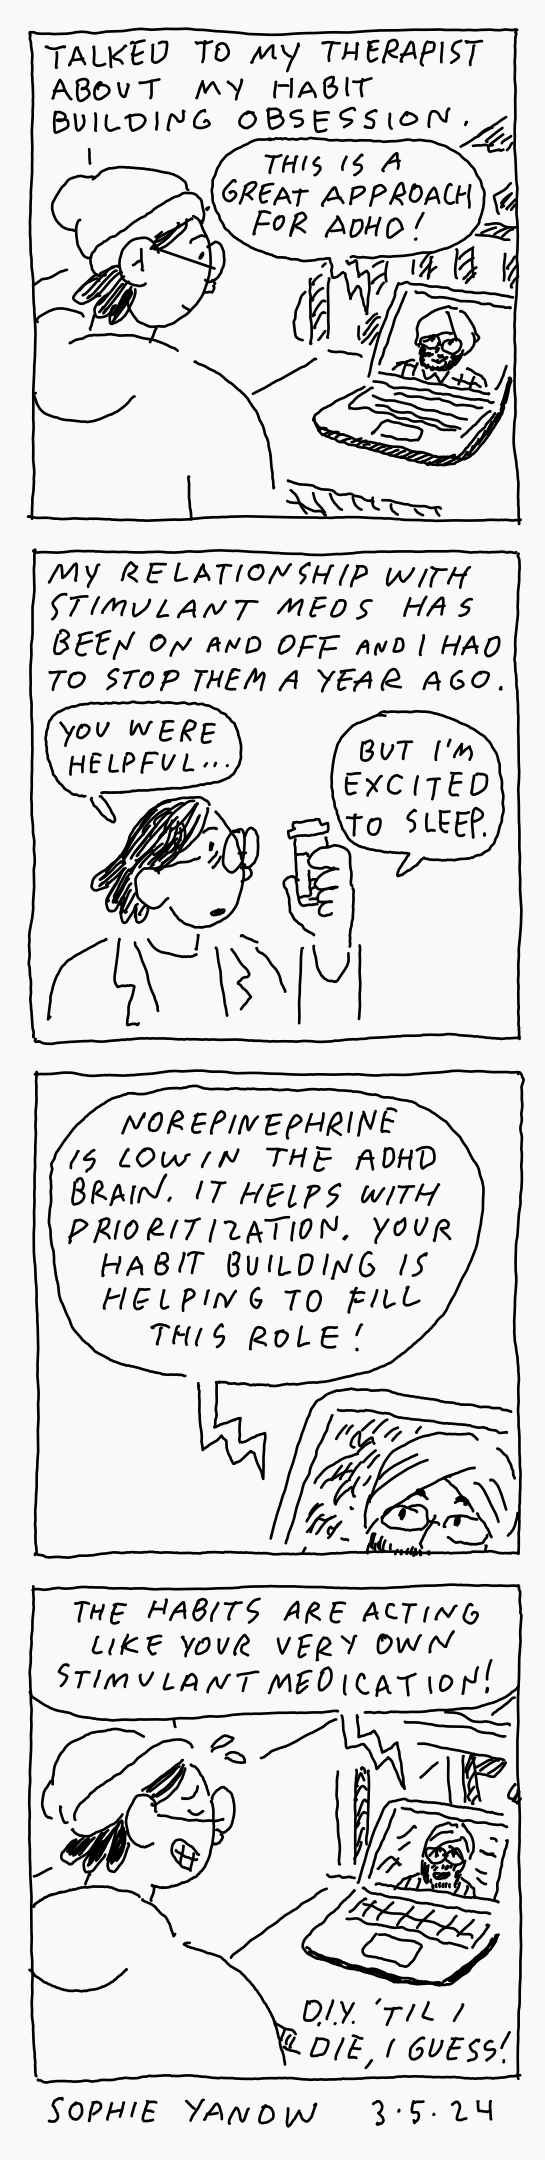 Your Very Own Stimulant Medication